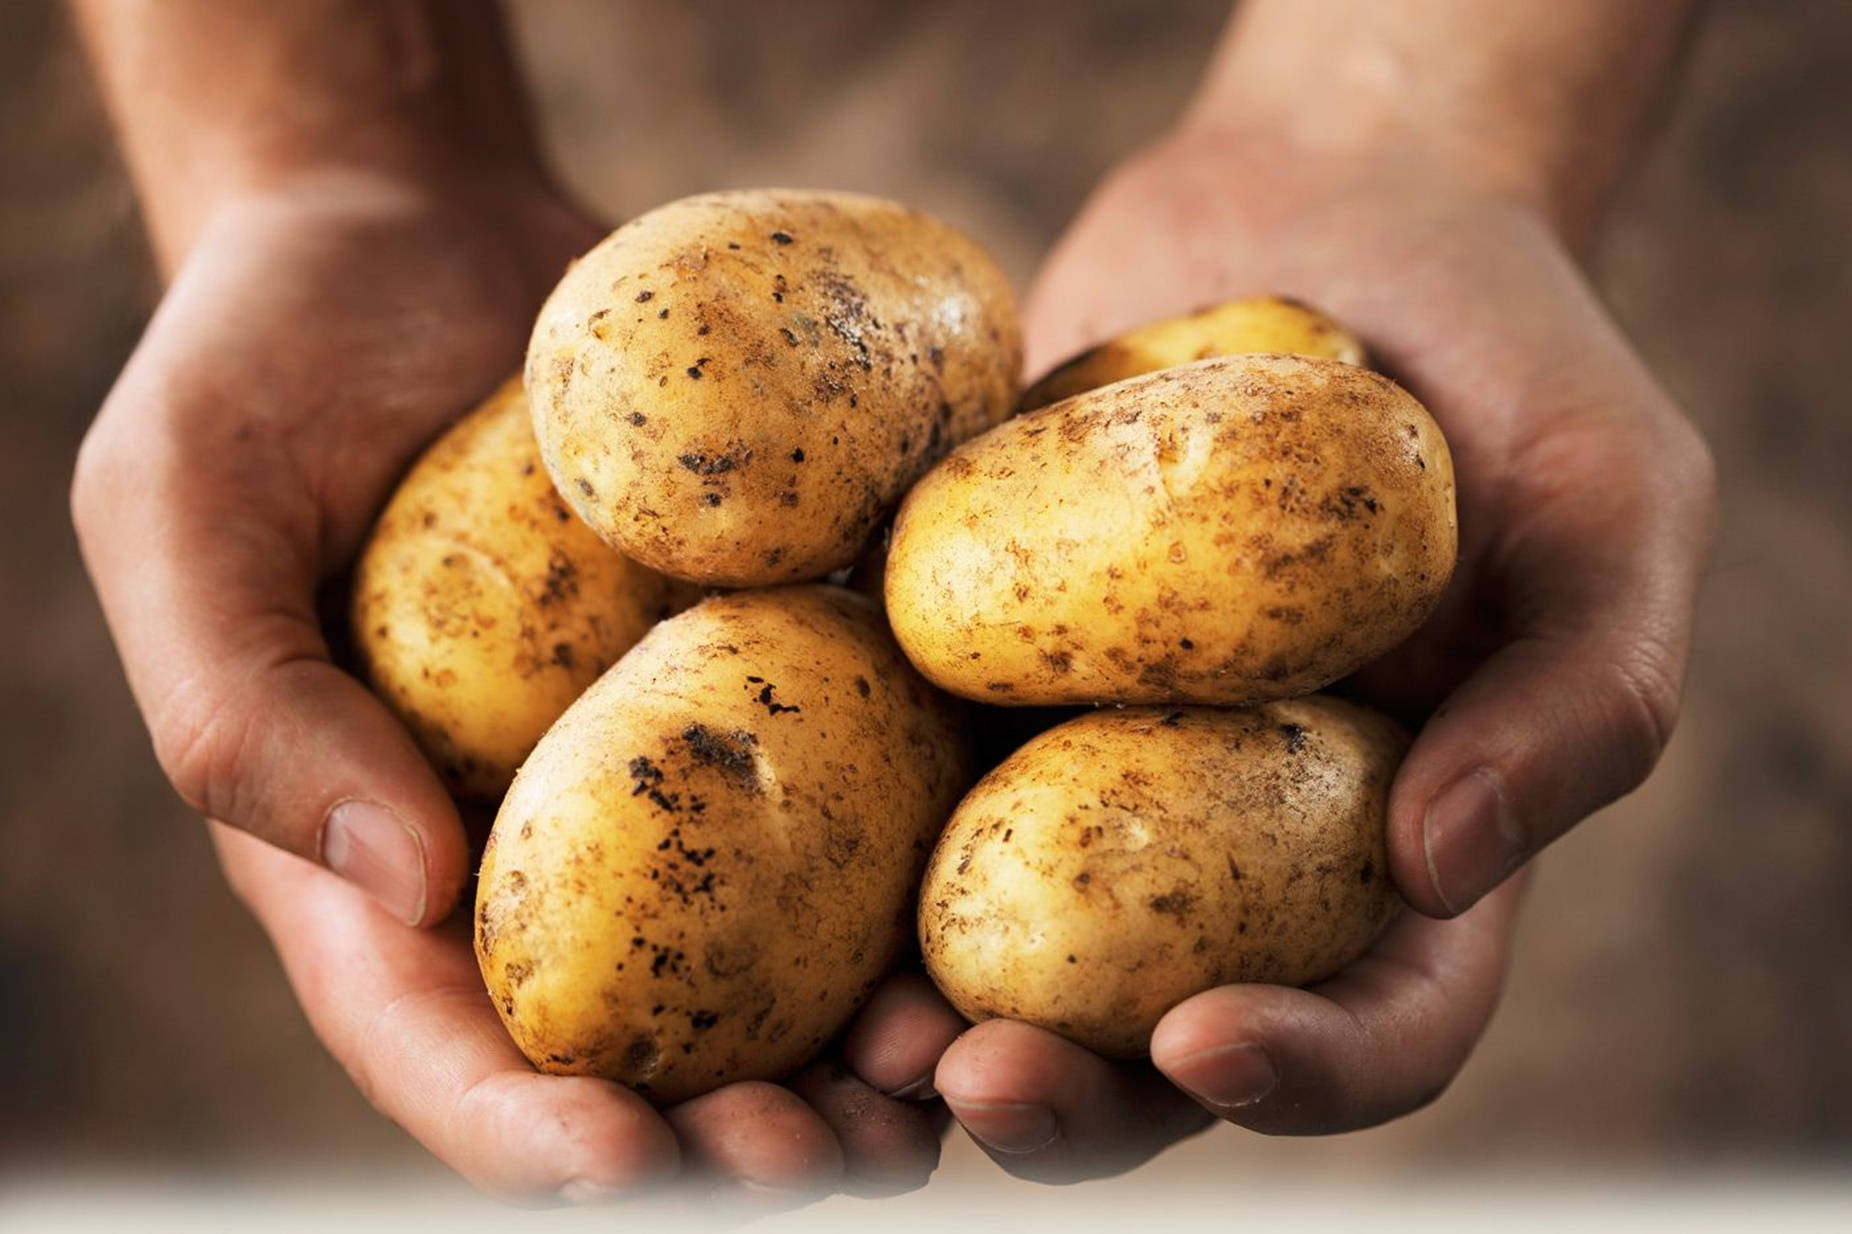 Potatoes And Hands Of A Man Wallpaper